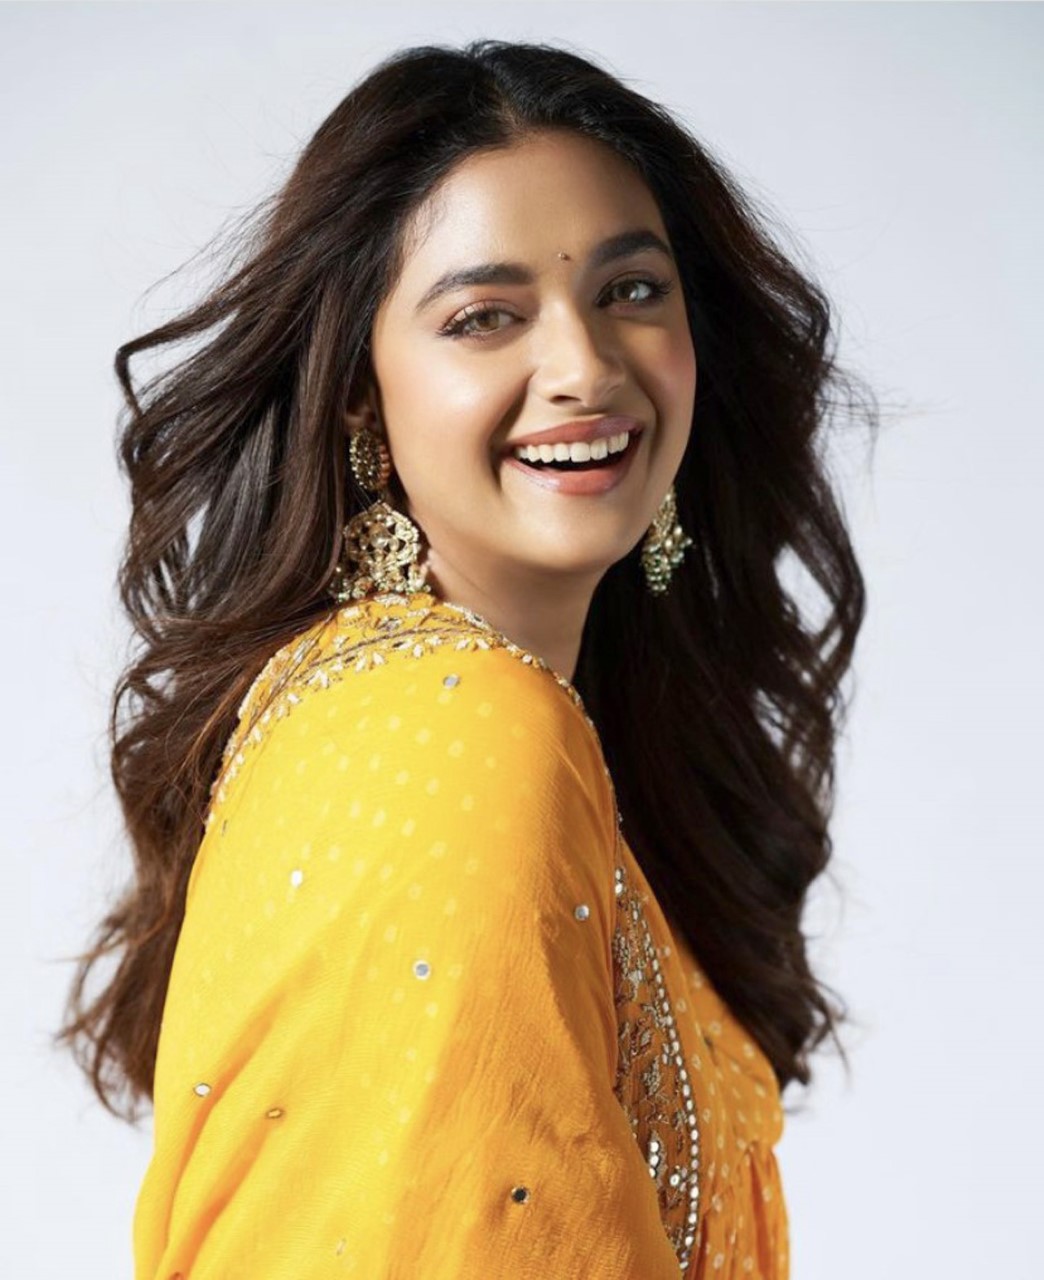 Keerthy Suresh is a sight to behold in bright yellow bandhani kurta